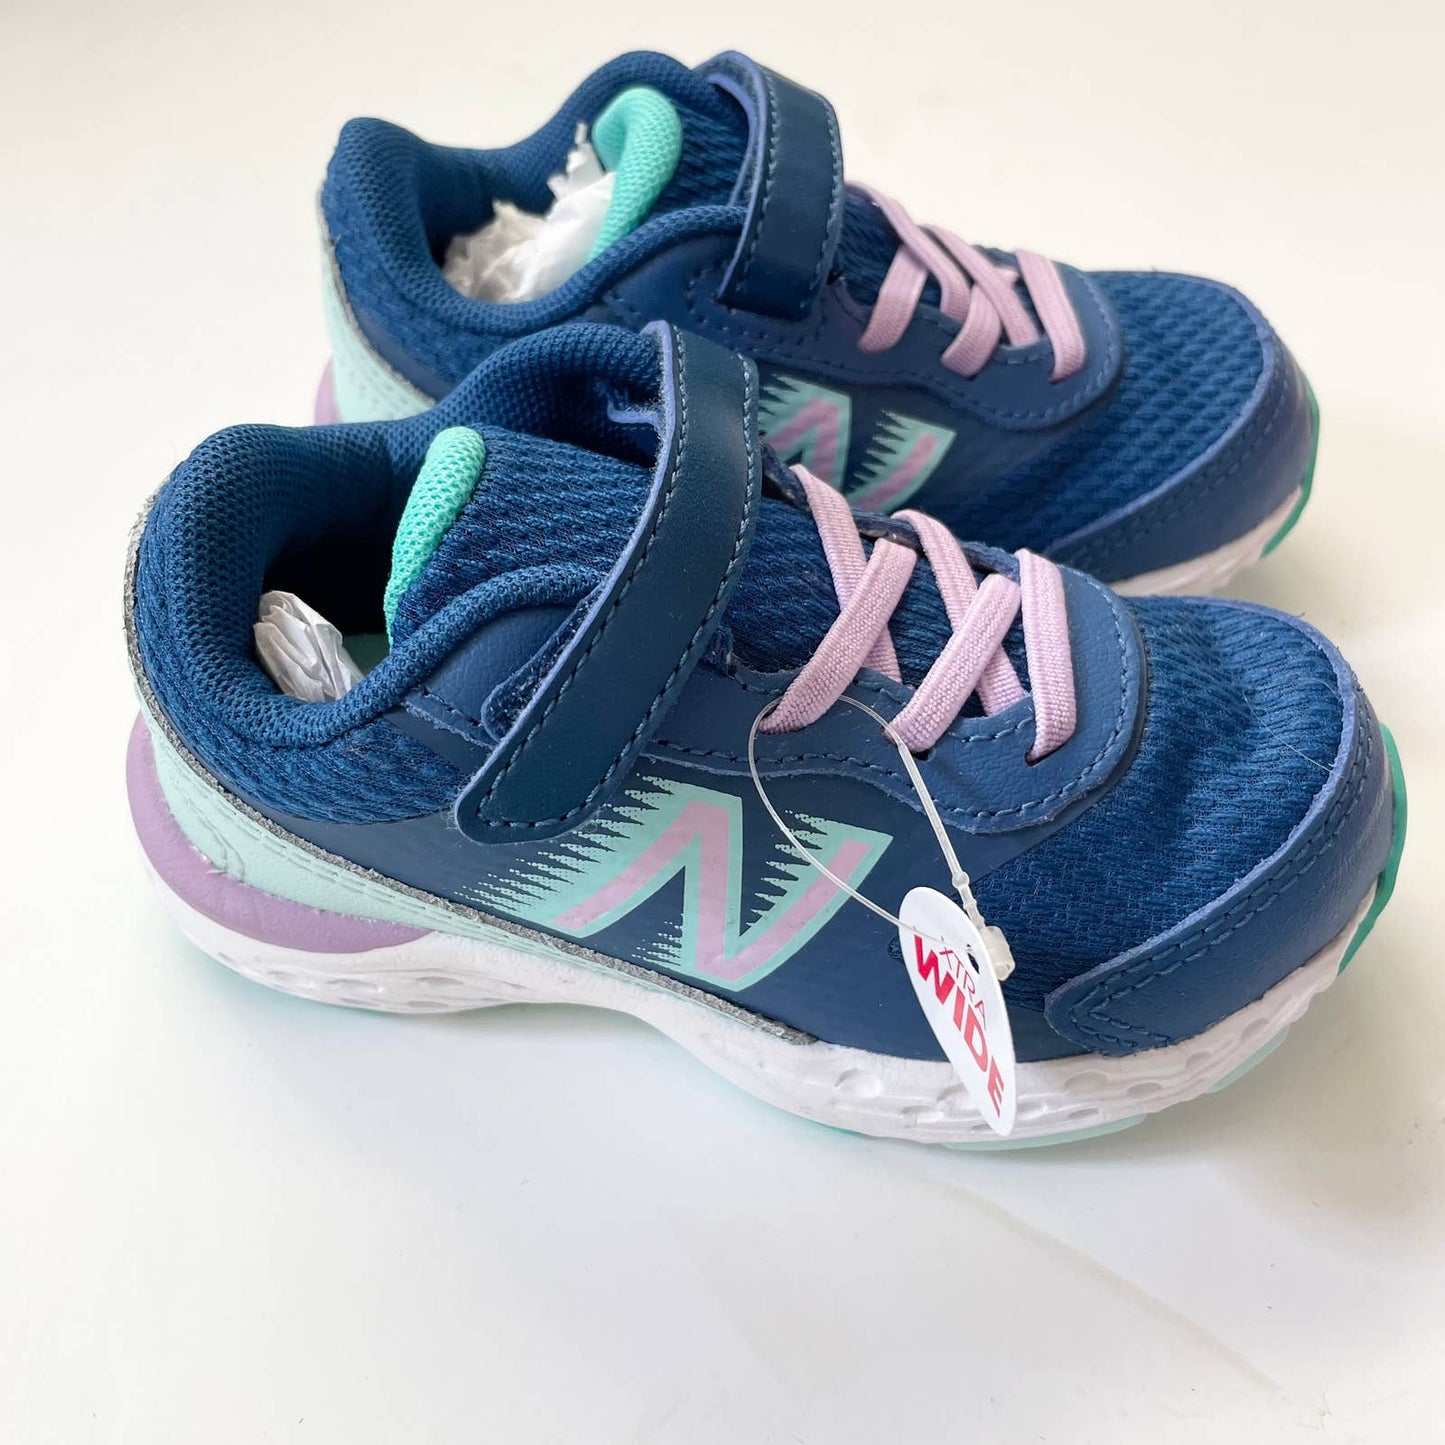 New Balance 680 v6 Kids Toddler 6 Extra Wide XW Sneakers